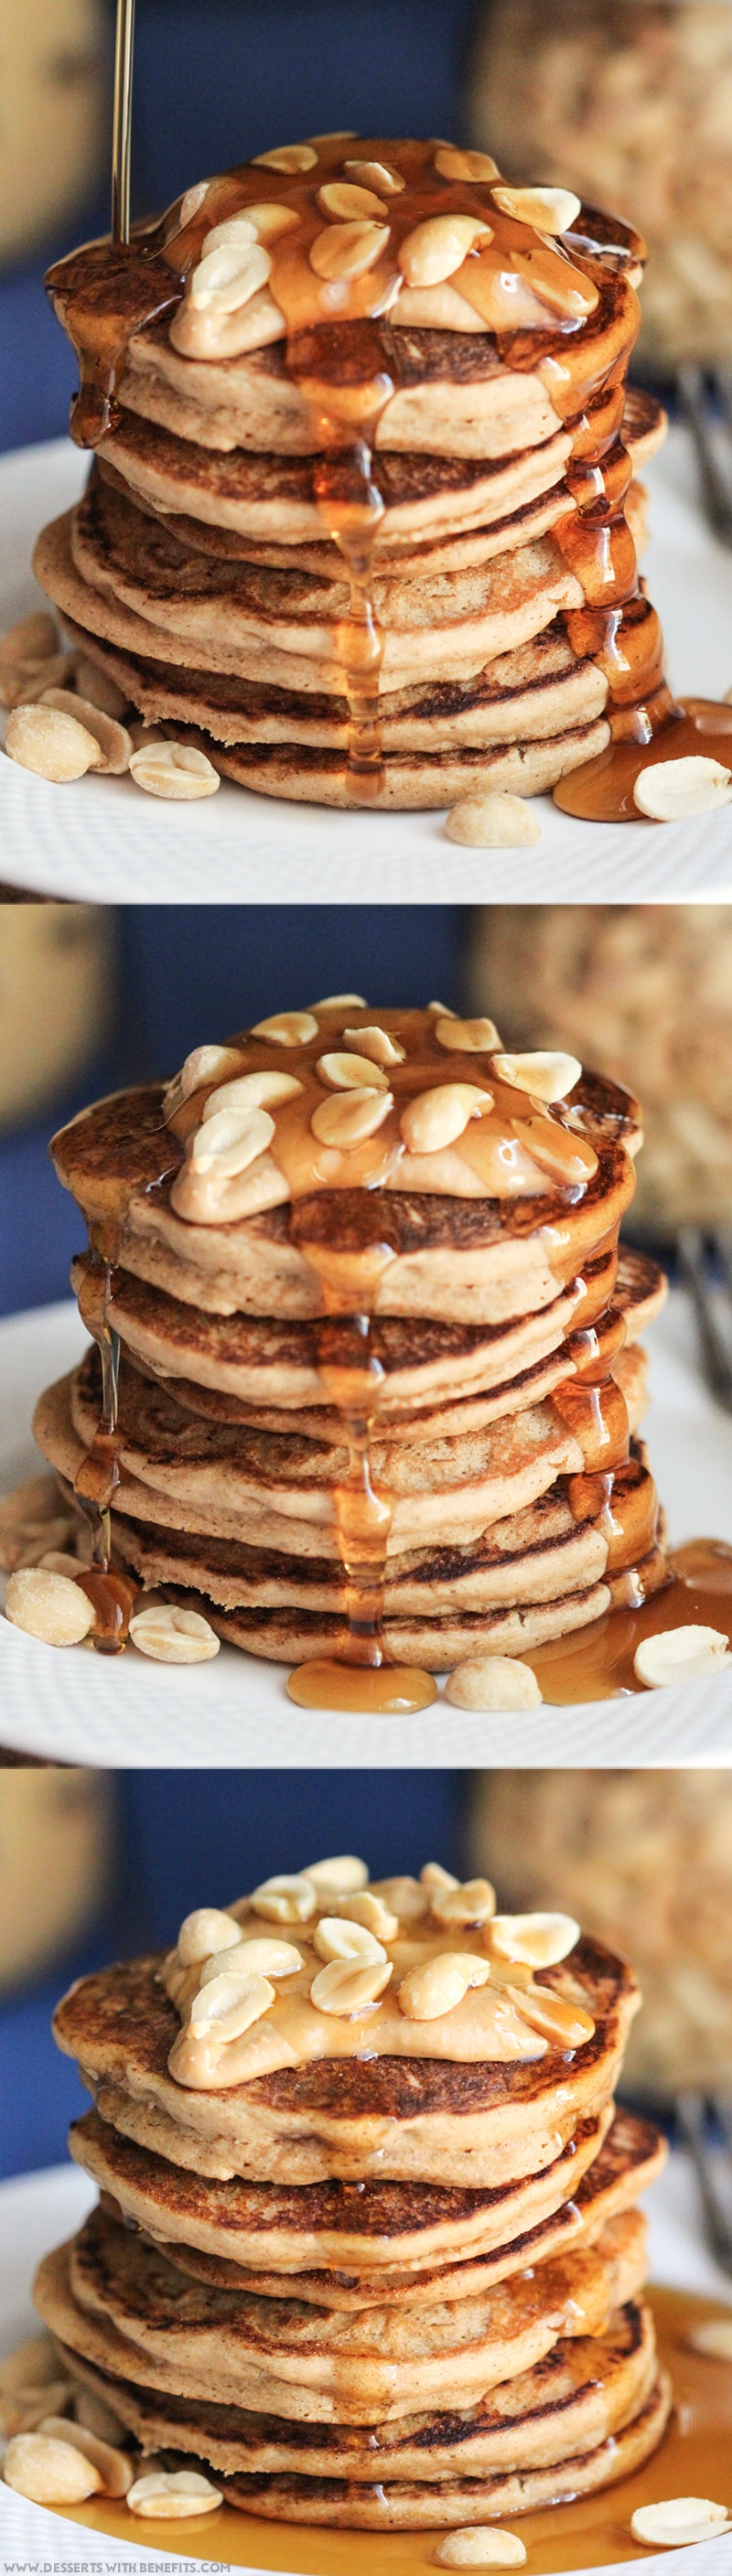 Healthy Peanut Butter Pancakes recipe (sugar free, low fat, high protein, high fiber, gluten free, dairy free, vegan) - Healthy Dessert Recipes at Desserts with Benefits